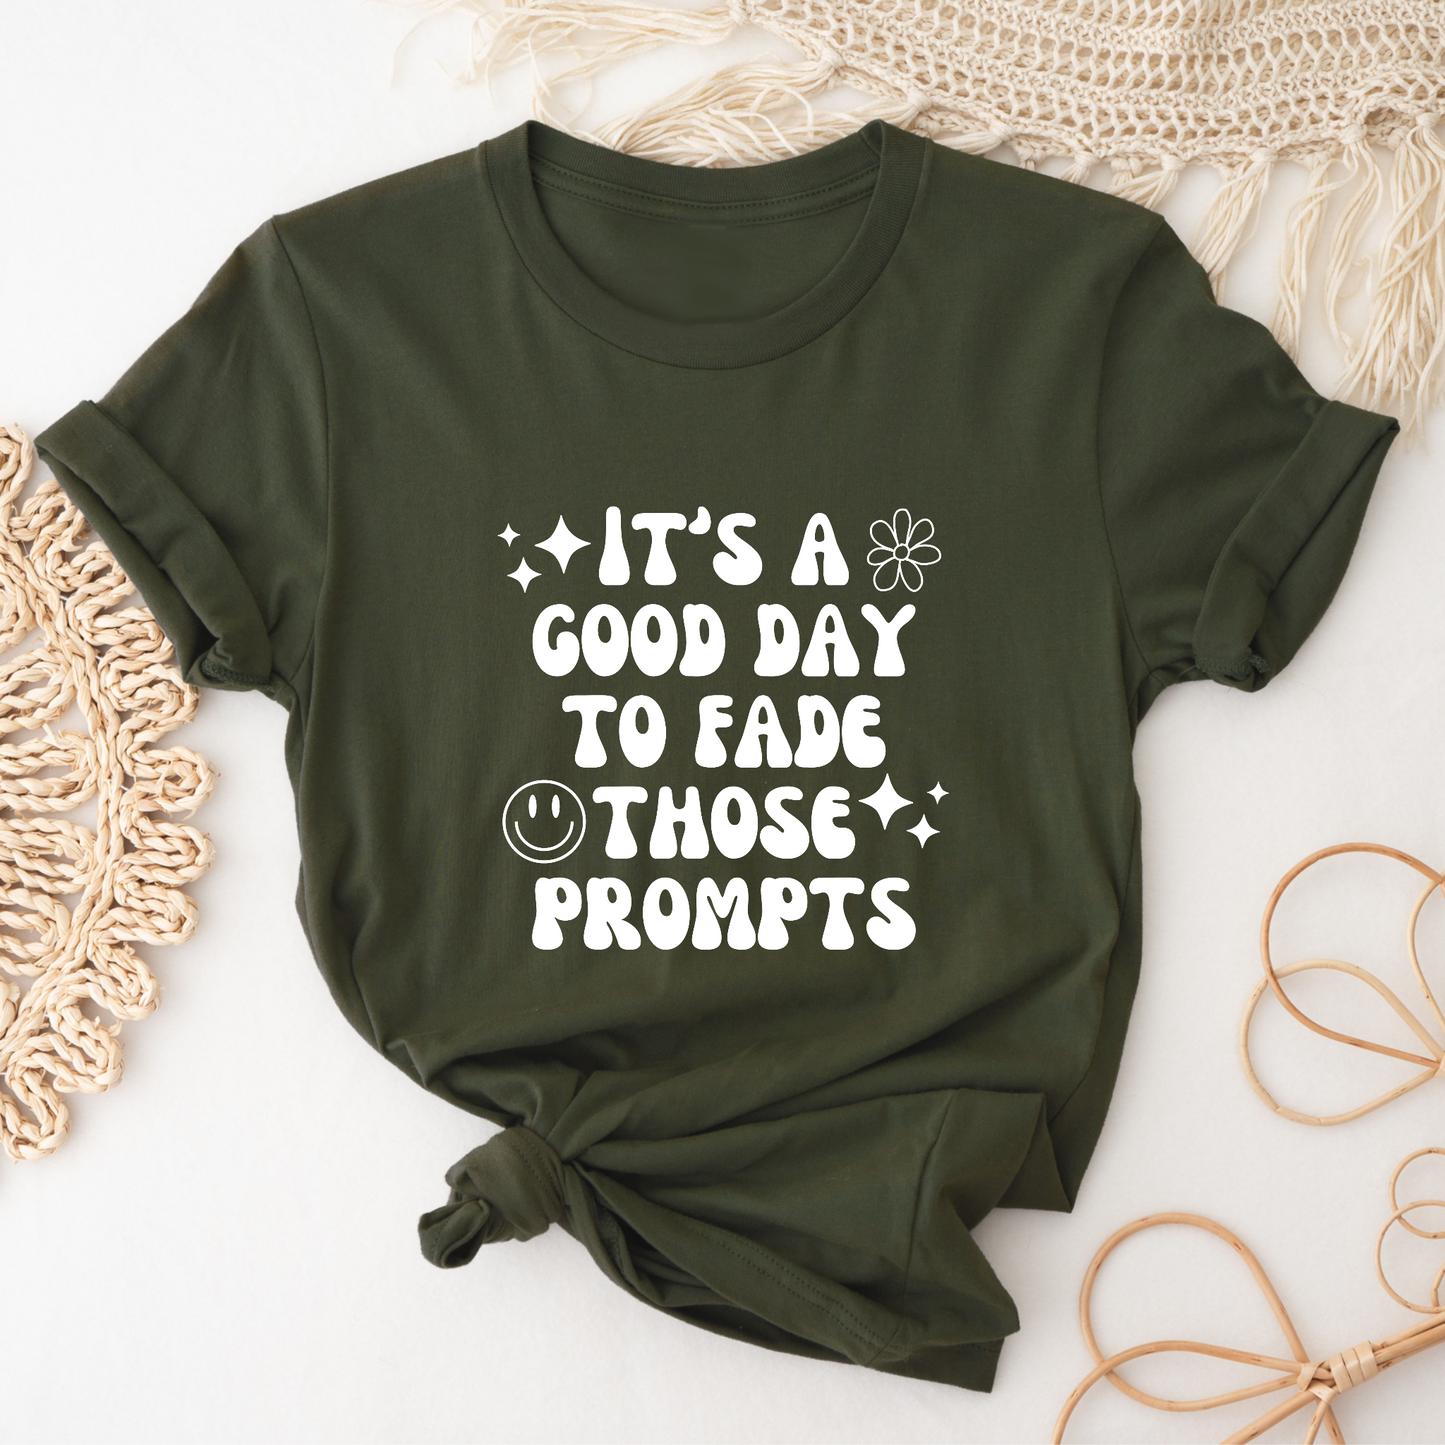 It's A Good Day to Fade Those Prompts Shirt #2 | Applied Behavior Analysis | Autism awareness | ABA Shirt | behavior analyst